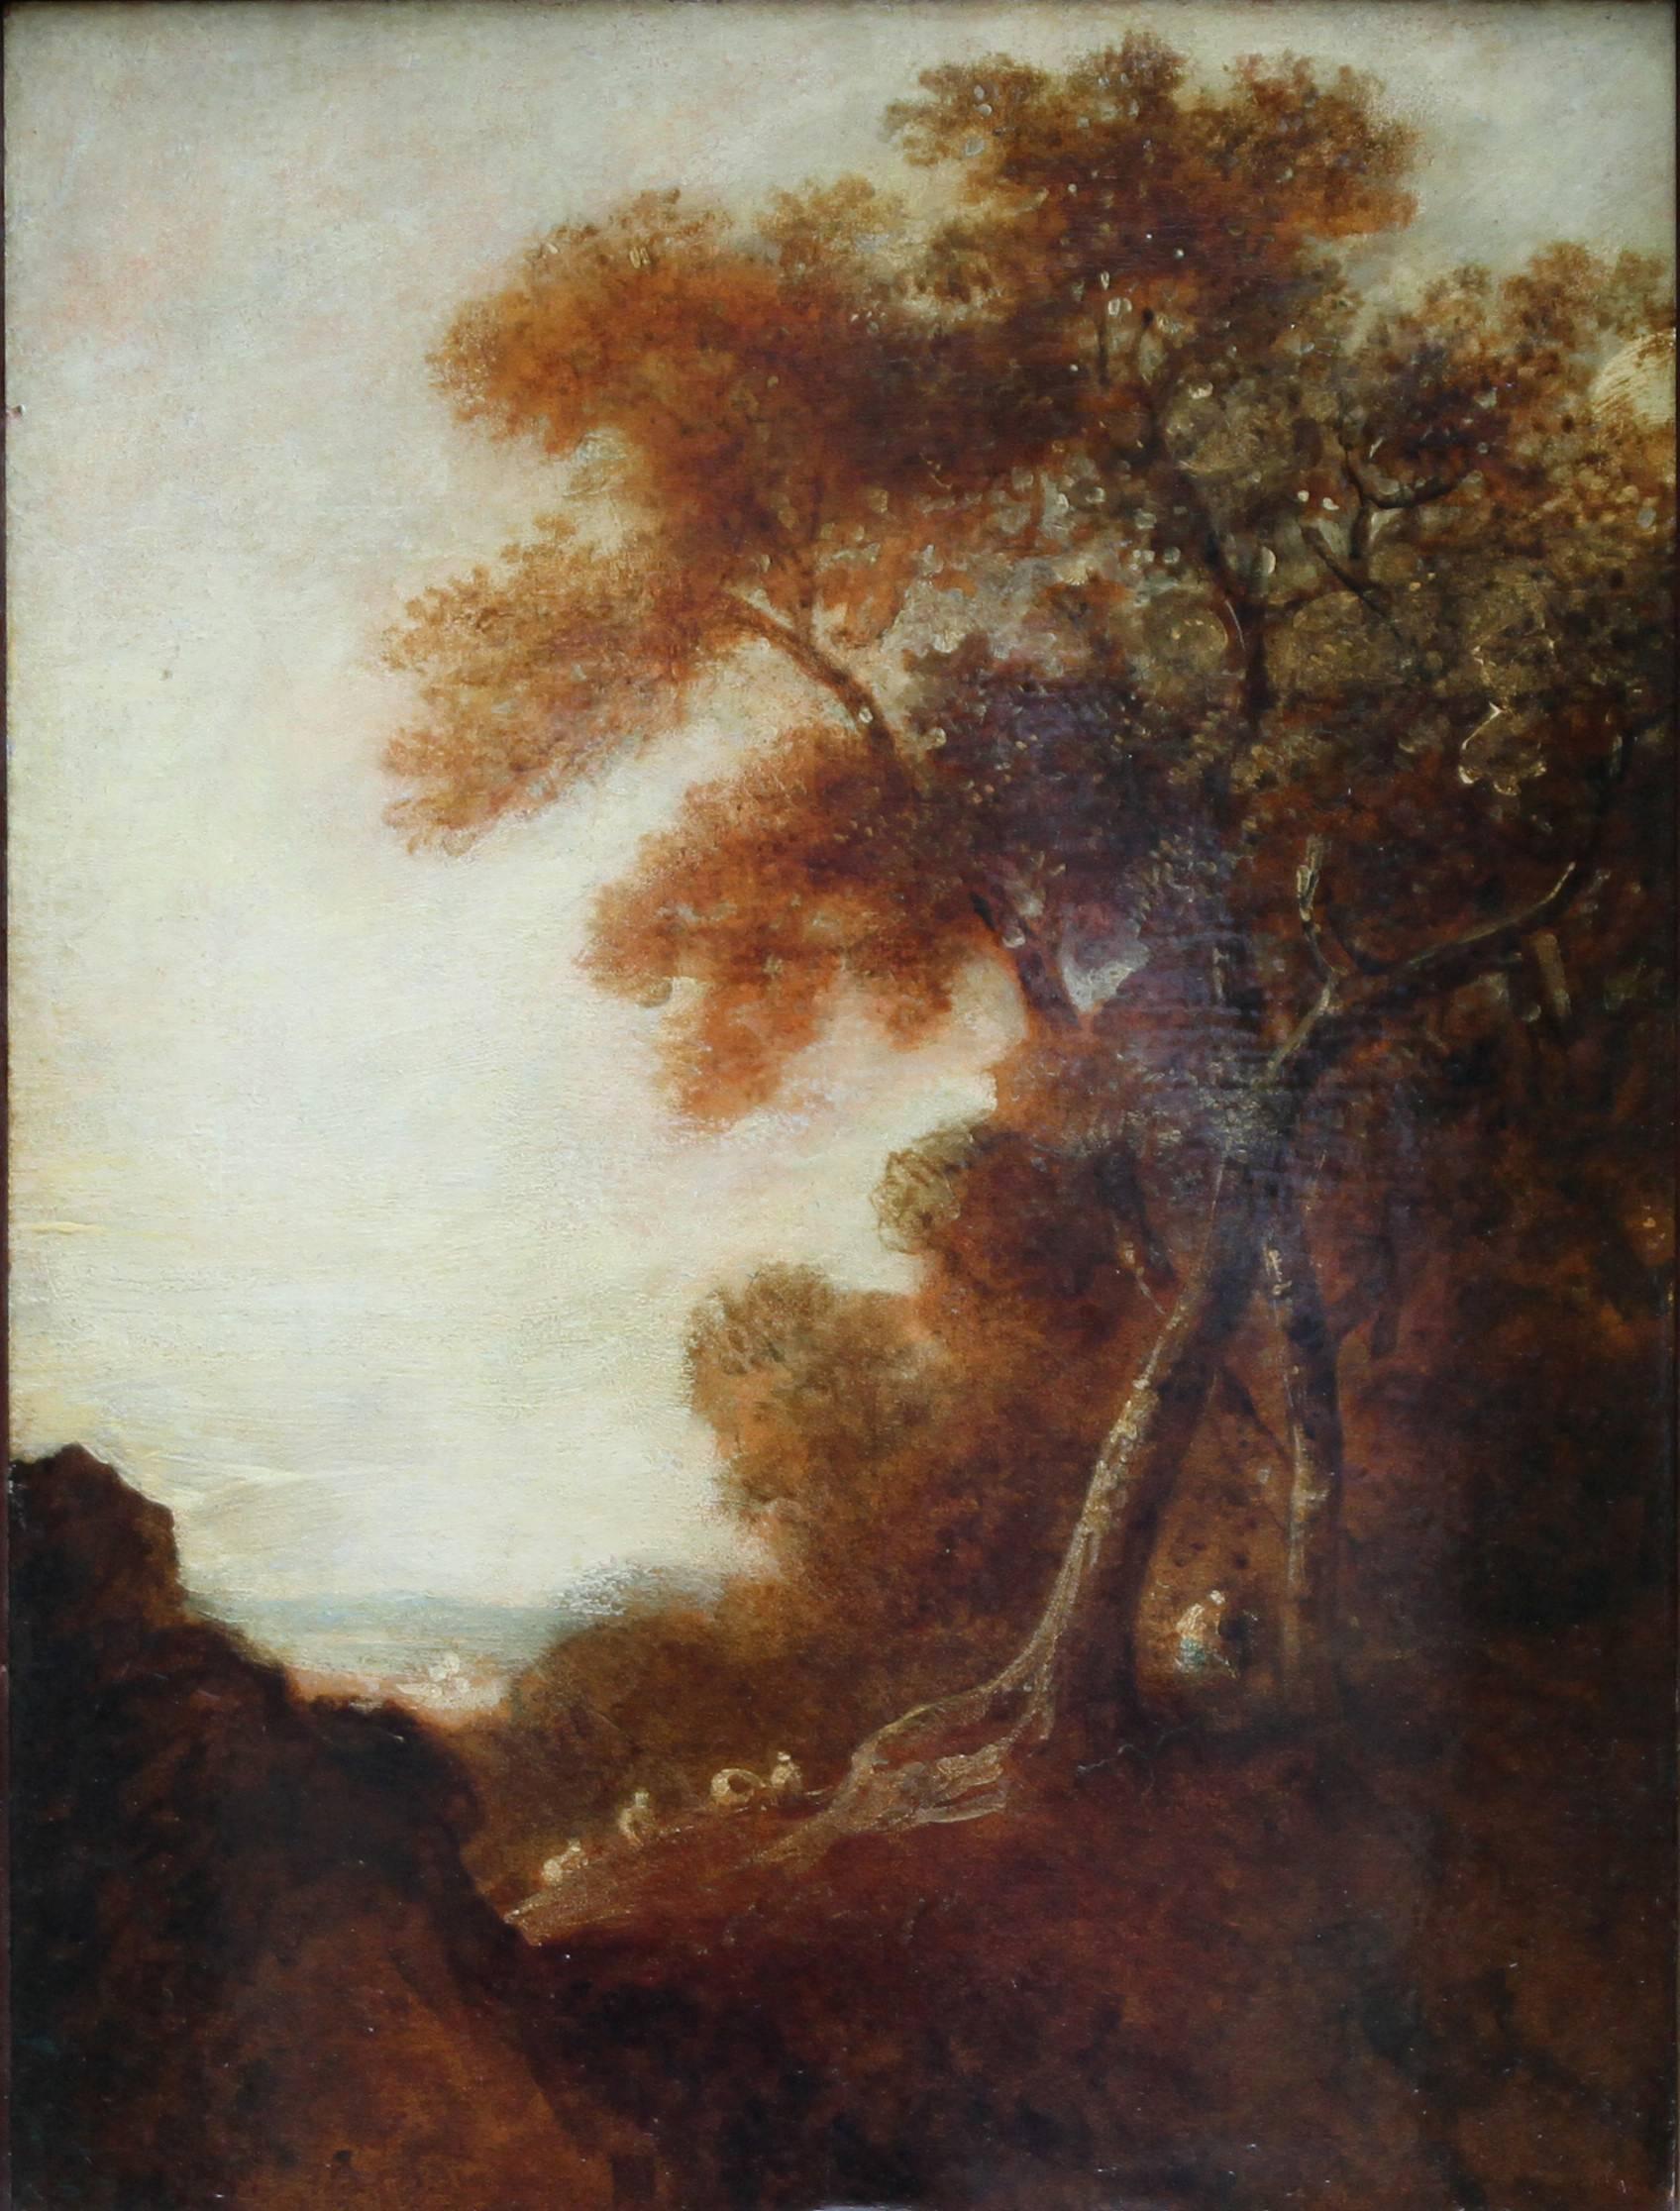 Wooded Landscape - British art 18thC Old Master oil painting trees figures - Painting by Thomas Gainsborough (circle)